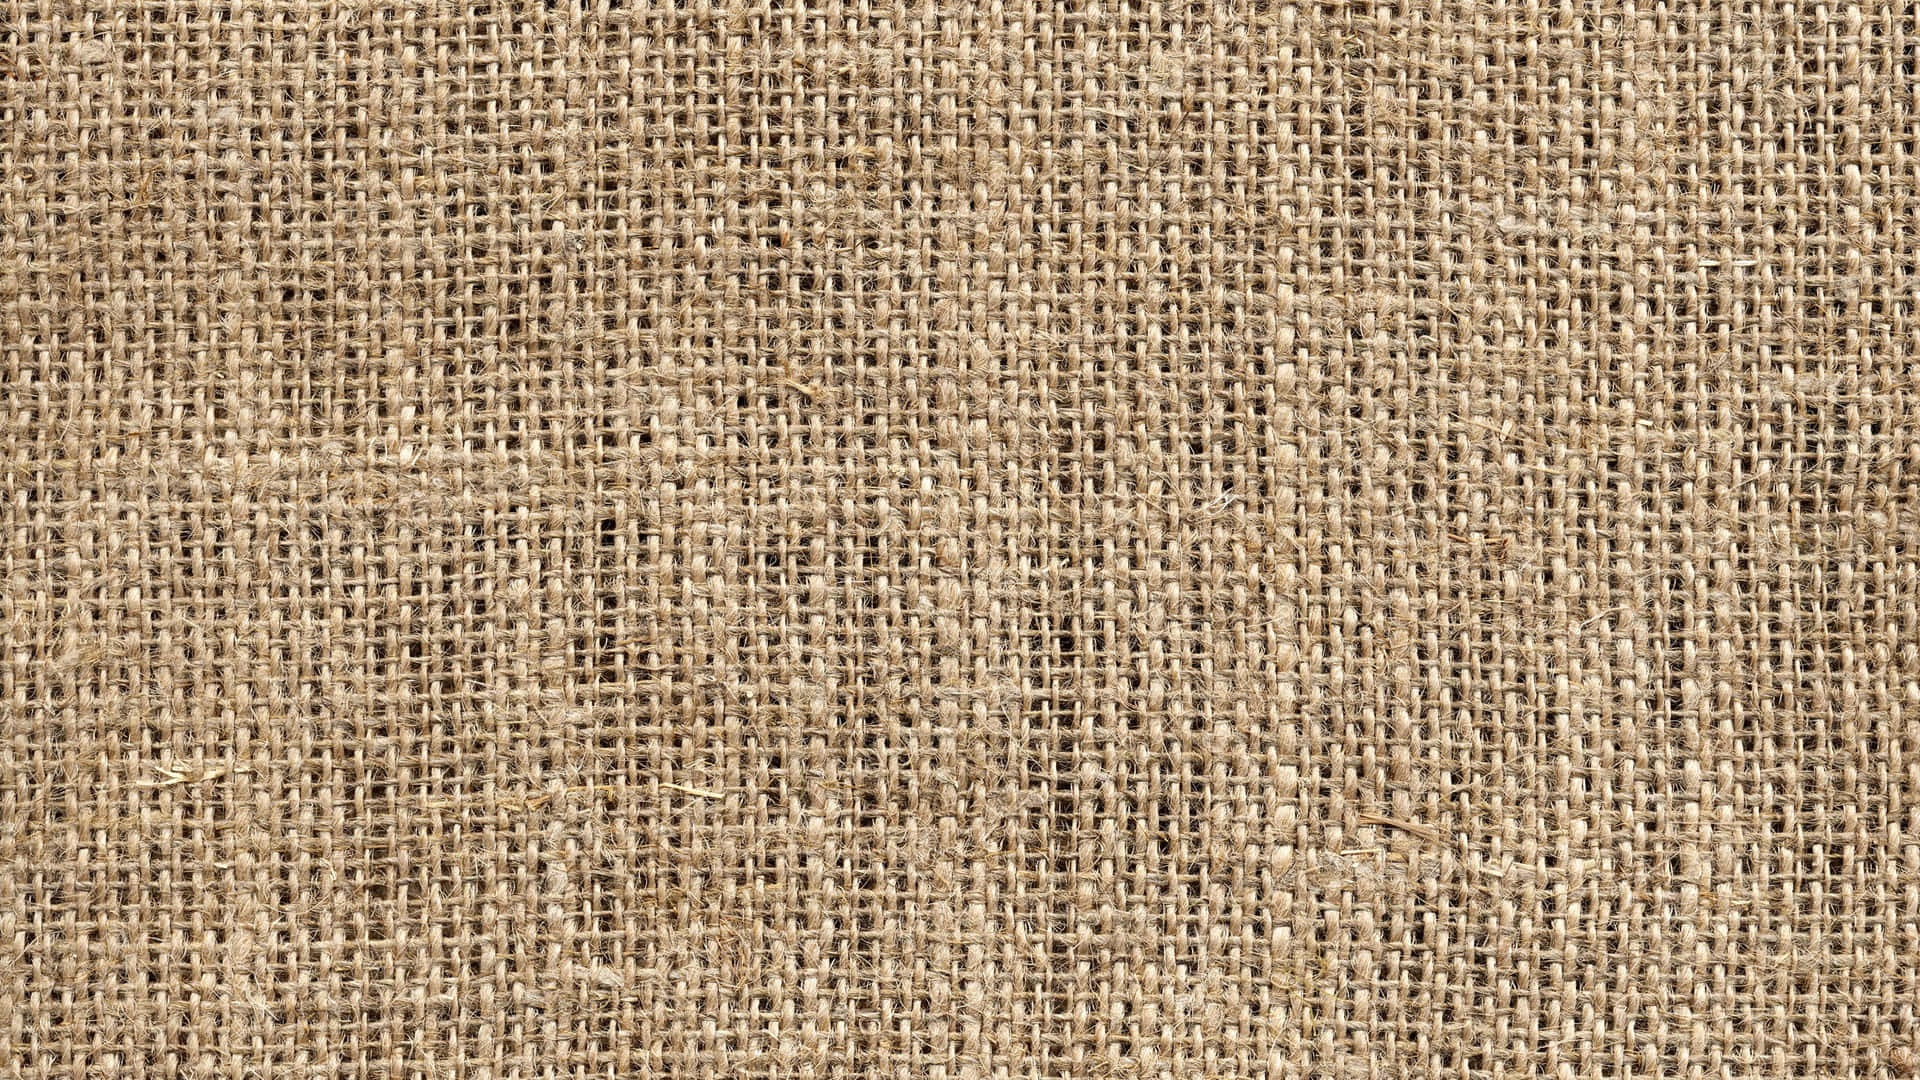 Burlap textured background in muted tans, browns, and whites.